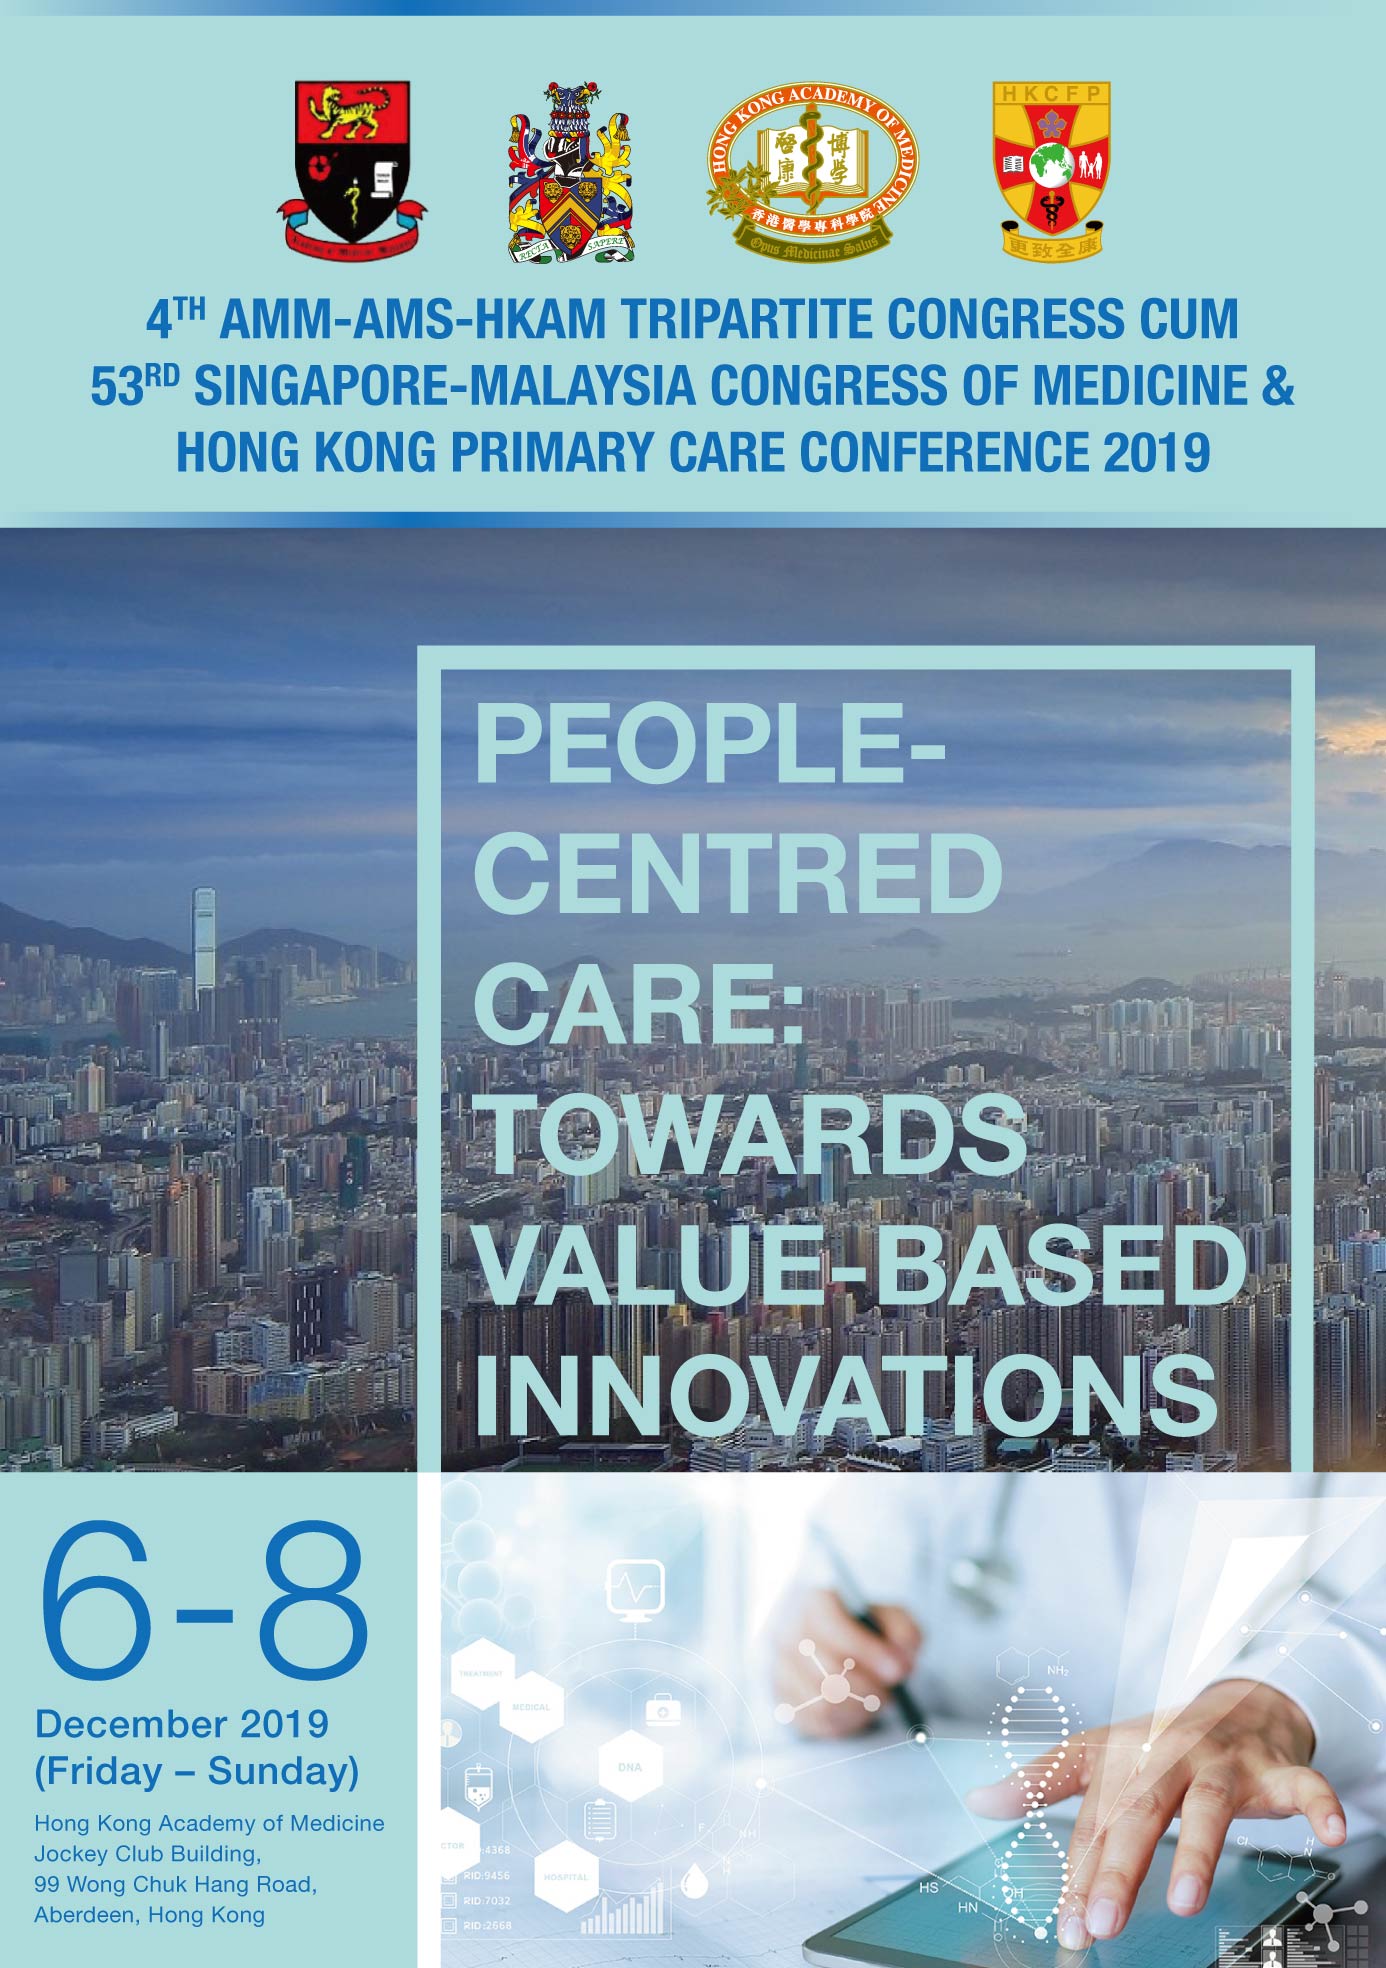 4th AMM-AMS-HKAM Tripartite Congress cum 53rd Singapore Malaysia Congress of Medicine & Hong Kong Primary Care Conference 2019 (Conference), 6-8 December 2019